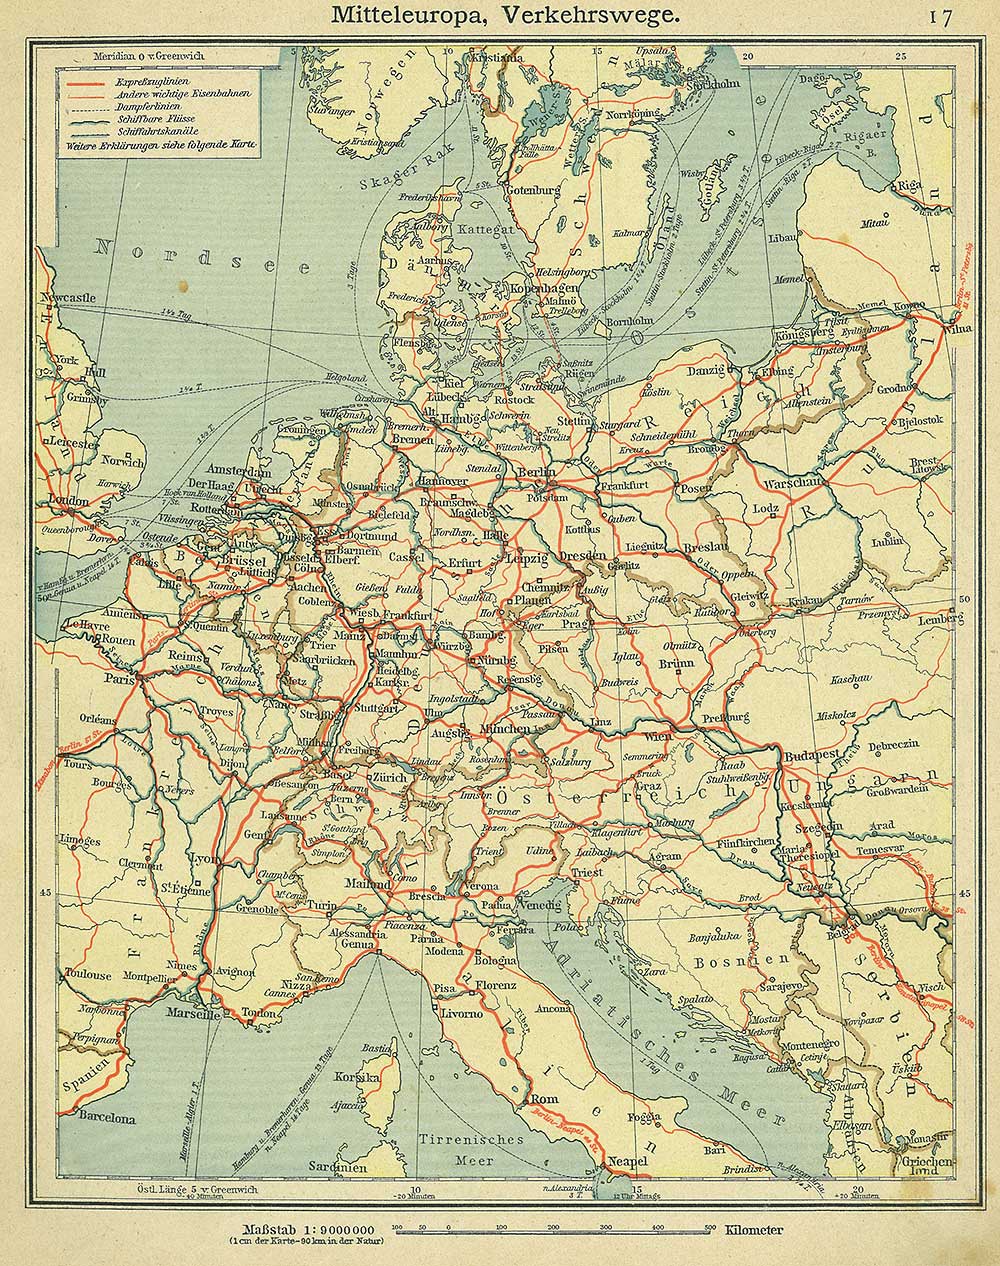 Central European transport / traffic routes, Andrees 'Berliner Schul-Atlas', 1916, page 17, published size to print borders 20.42 cm wide by 26.35 cm high.